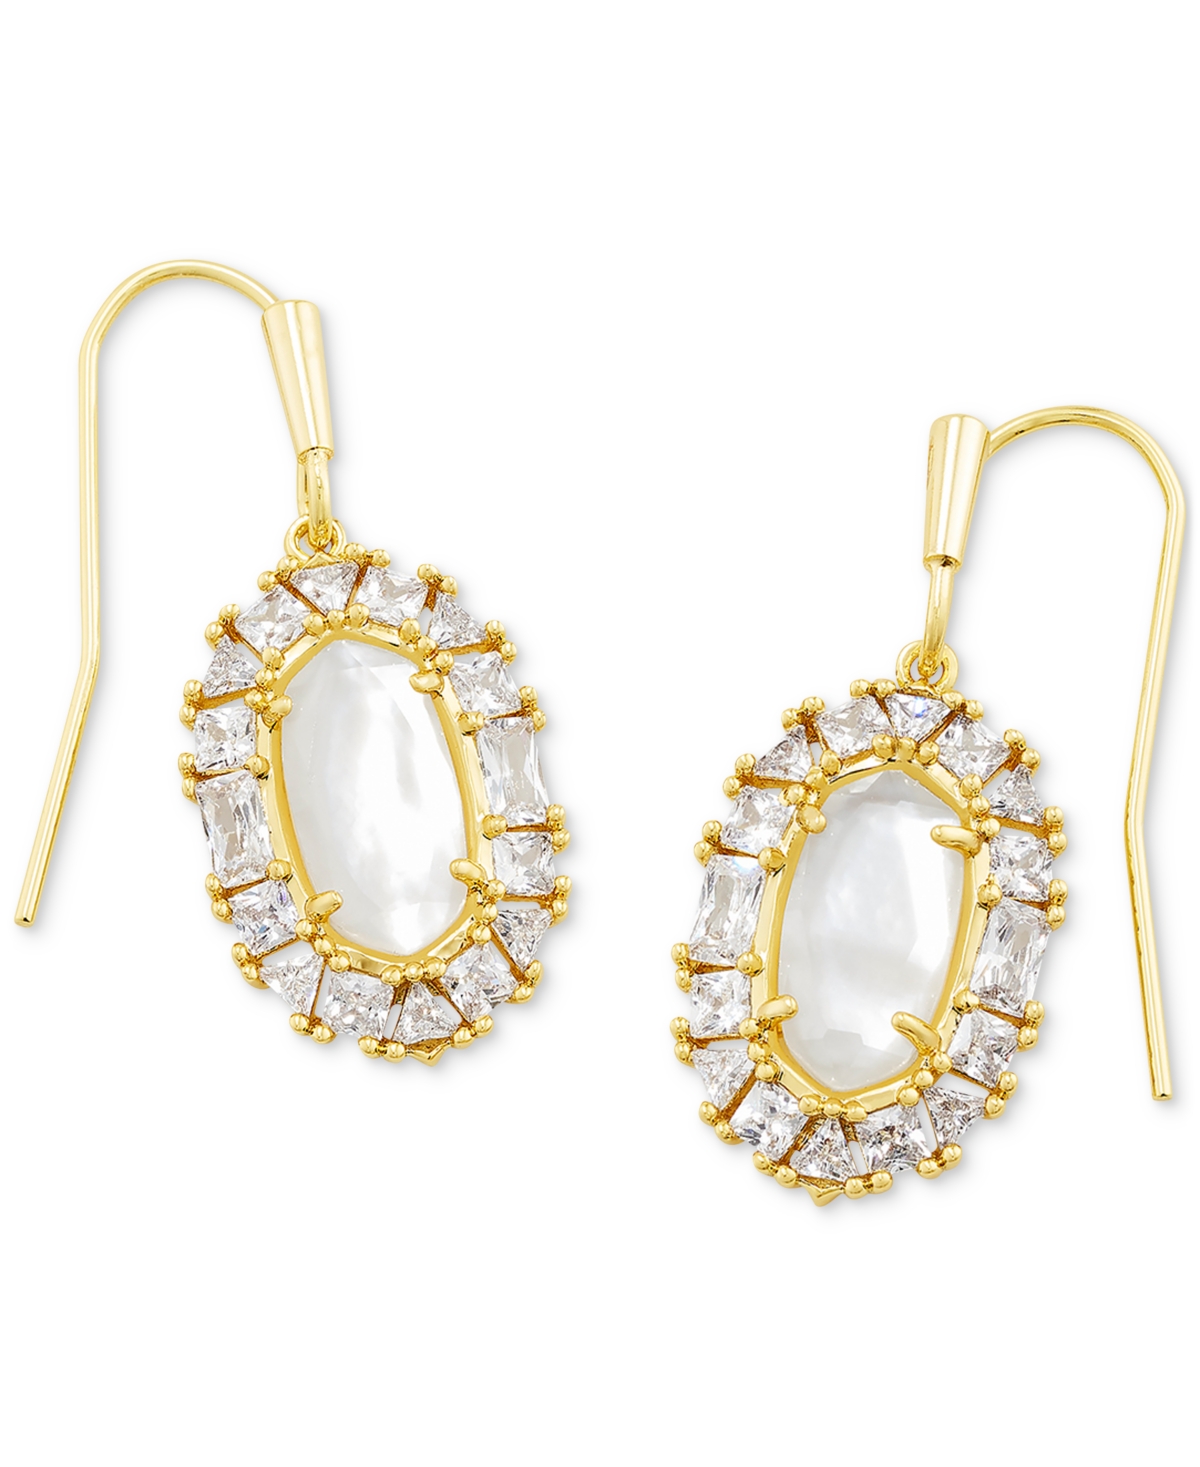 Crystal-Framed Mother-of-Pearl Drop Earrings - Two Tone